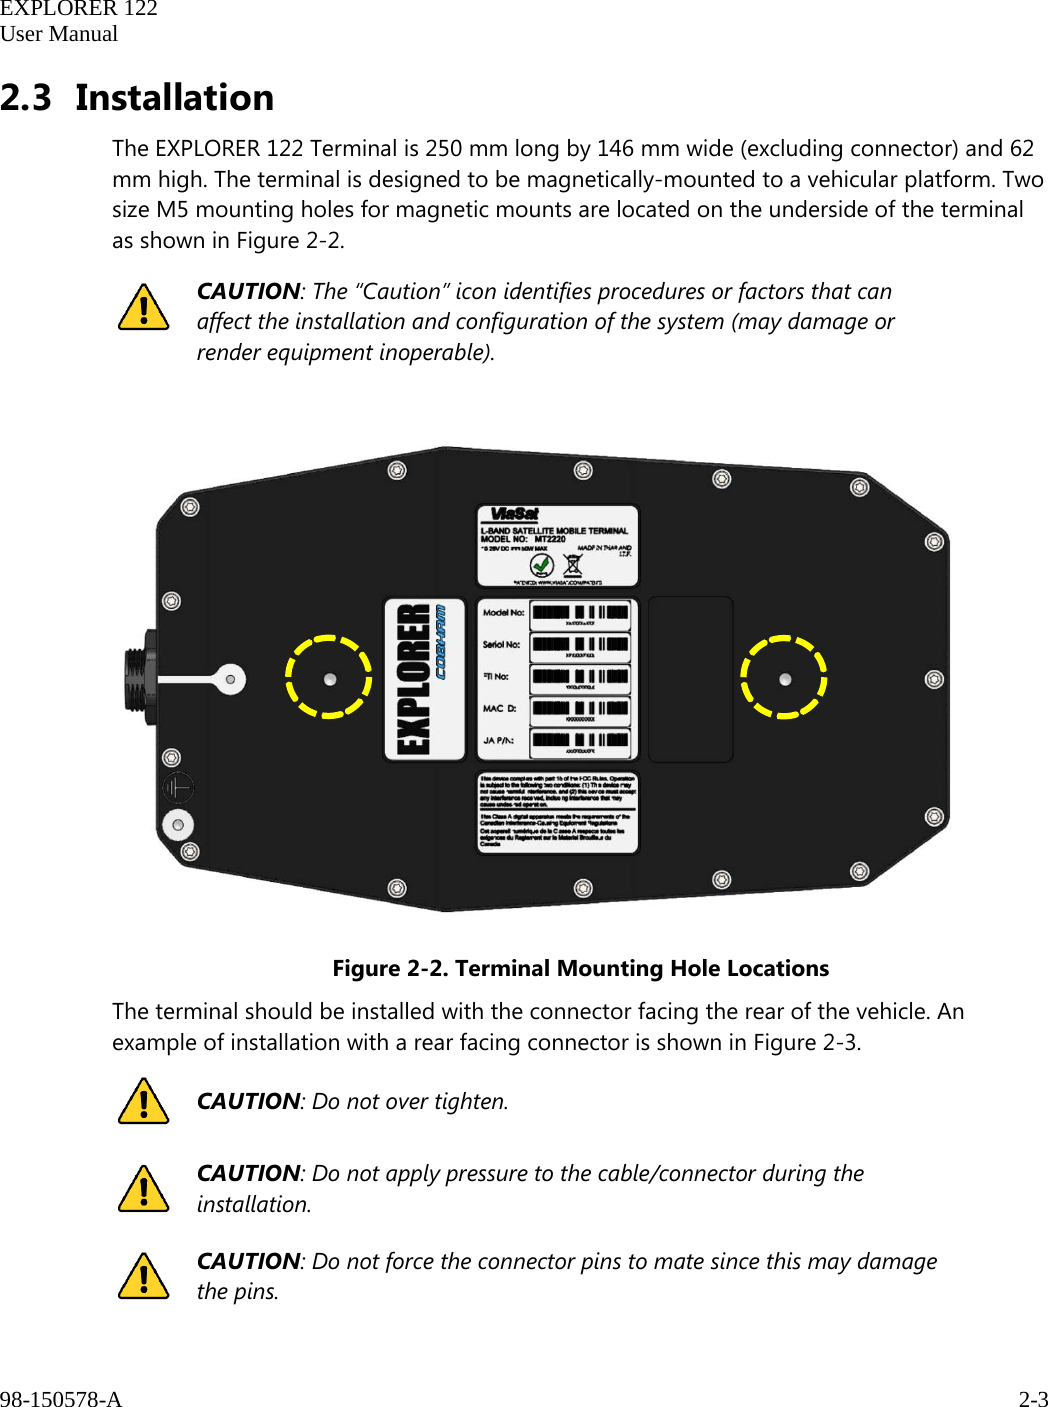   EXPLORER 122  User Manual  98-150578-A     2-3   2.3 Installation The EXPLORER 122 Terminal is 250 mm long by 146 mm wide (excluding connector) and 62 mm high. The terminal is designed to be magnetically-mounted to a vehicular platform. Two size M5 mounting holes for magnetic mounts are located on the underside of the terminal as shown in Figure 2-2.  CAUTION: The “Caution” icon identifies procedures or factors that can affect the installation and configuration of the system (may damage or render equipment inoperable).     Figure 2-2. Terminal Mounting Hole Locations The terminal should be installed with the connector facing the rear of the vehicle. An example of installation with a rear facing connector is shown in Figure 2-3.  CAUTION: Do not over tighten.  CAUTION: Do not apply pressure to the cable/connector during the installation.  CAUTION: Do not force the connector pins to mate since this may damage the pins.              